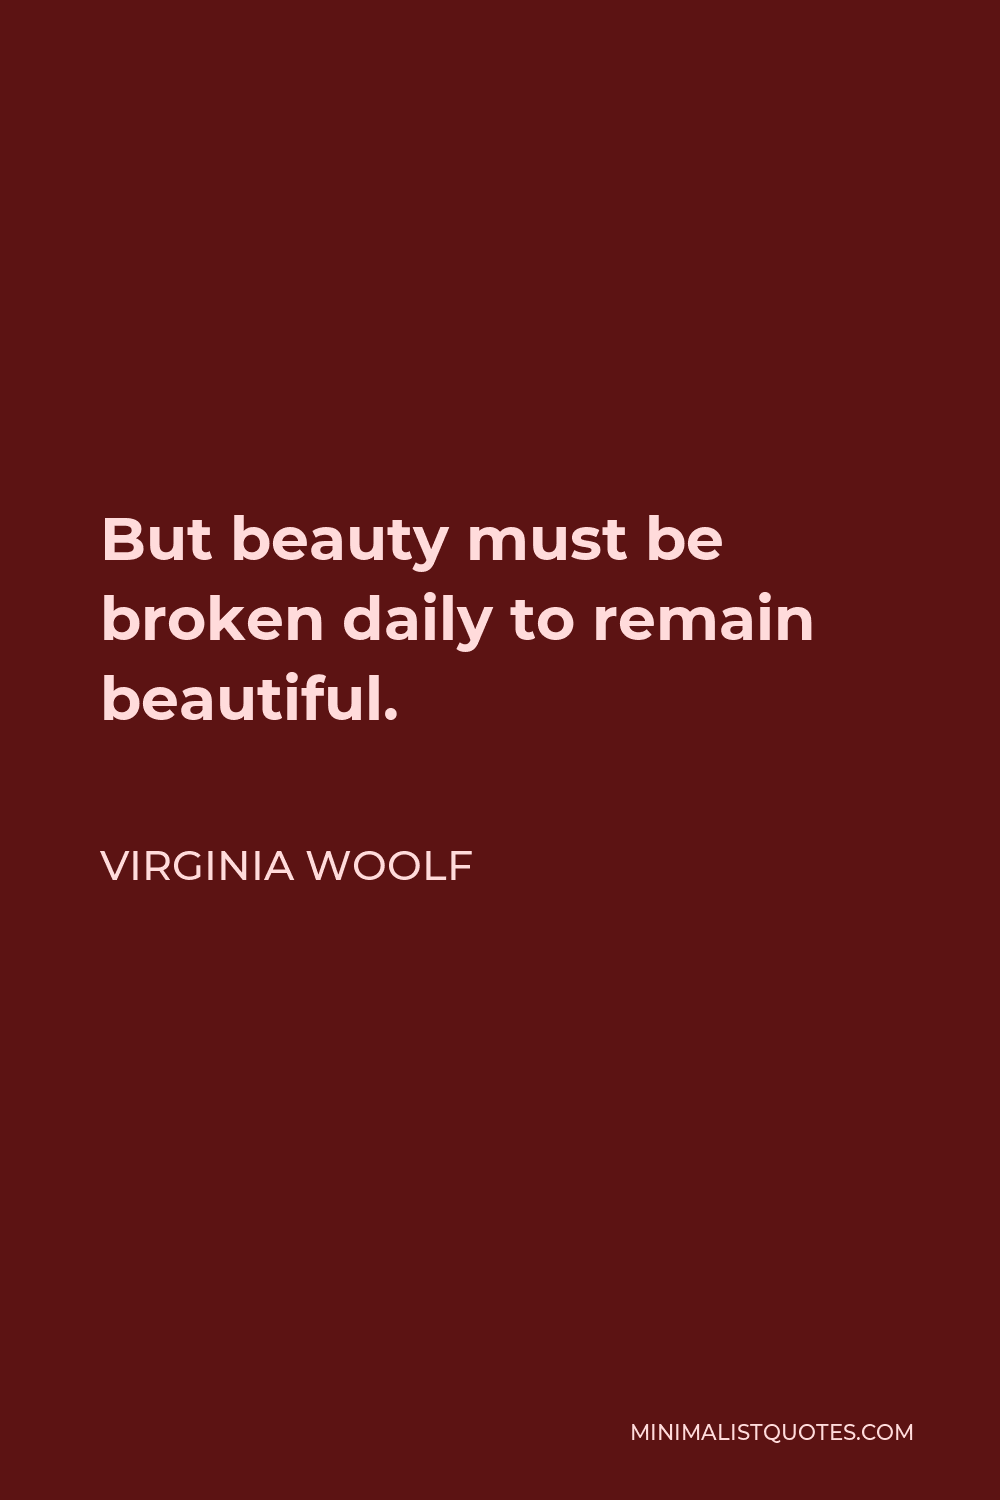 Virginia Woolf Quote - But beauty must be broken daily to remain beautiful.